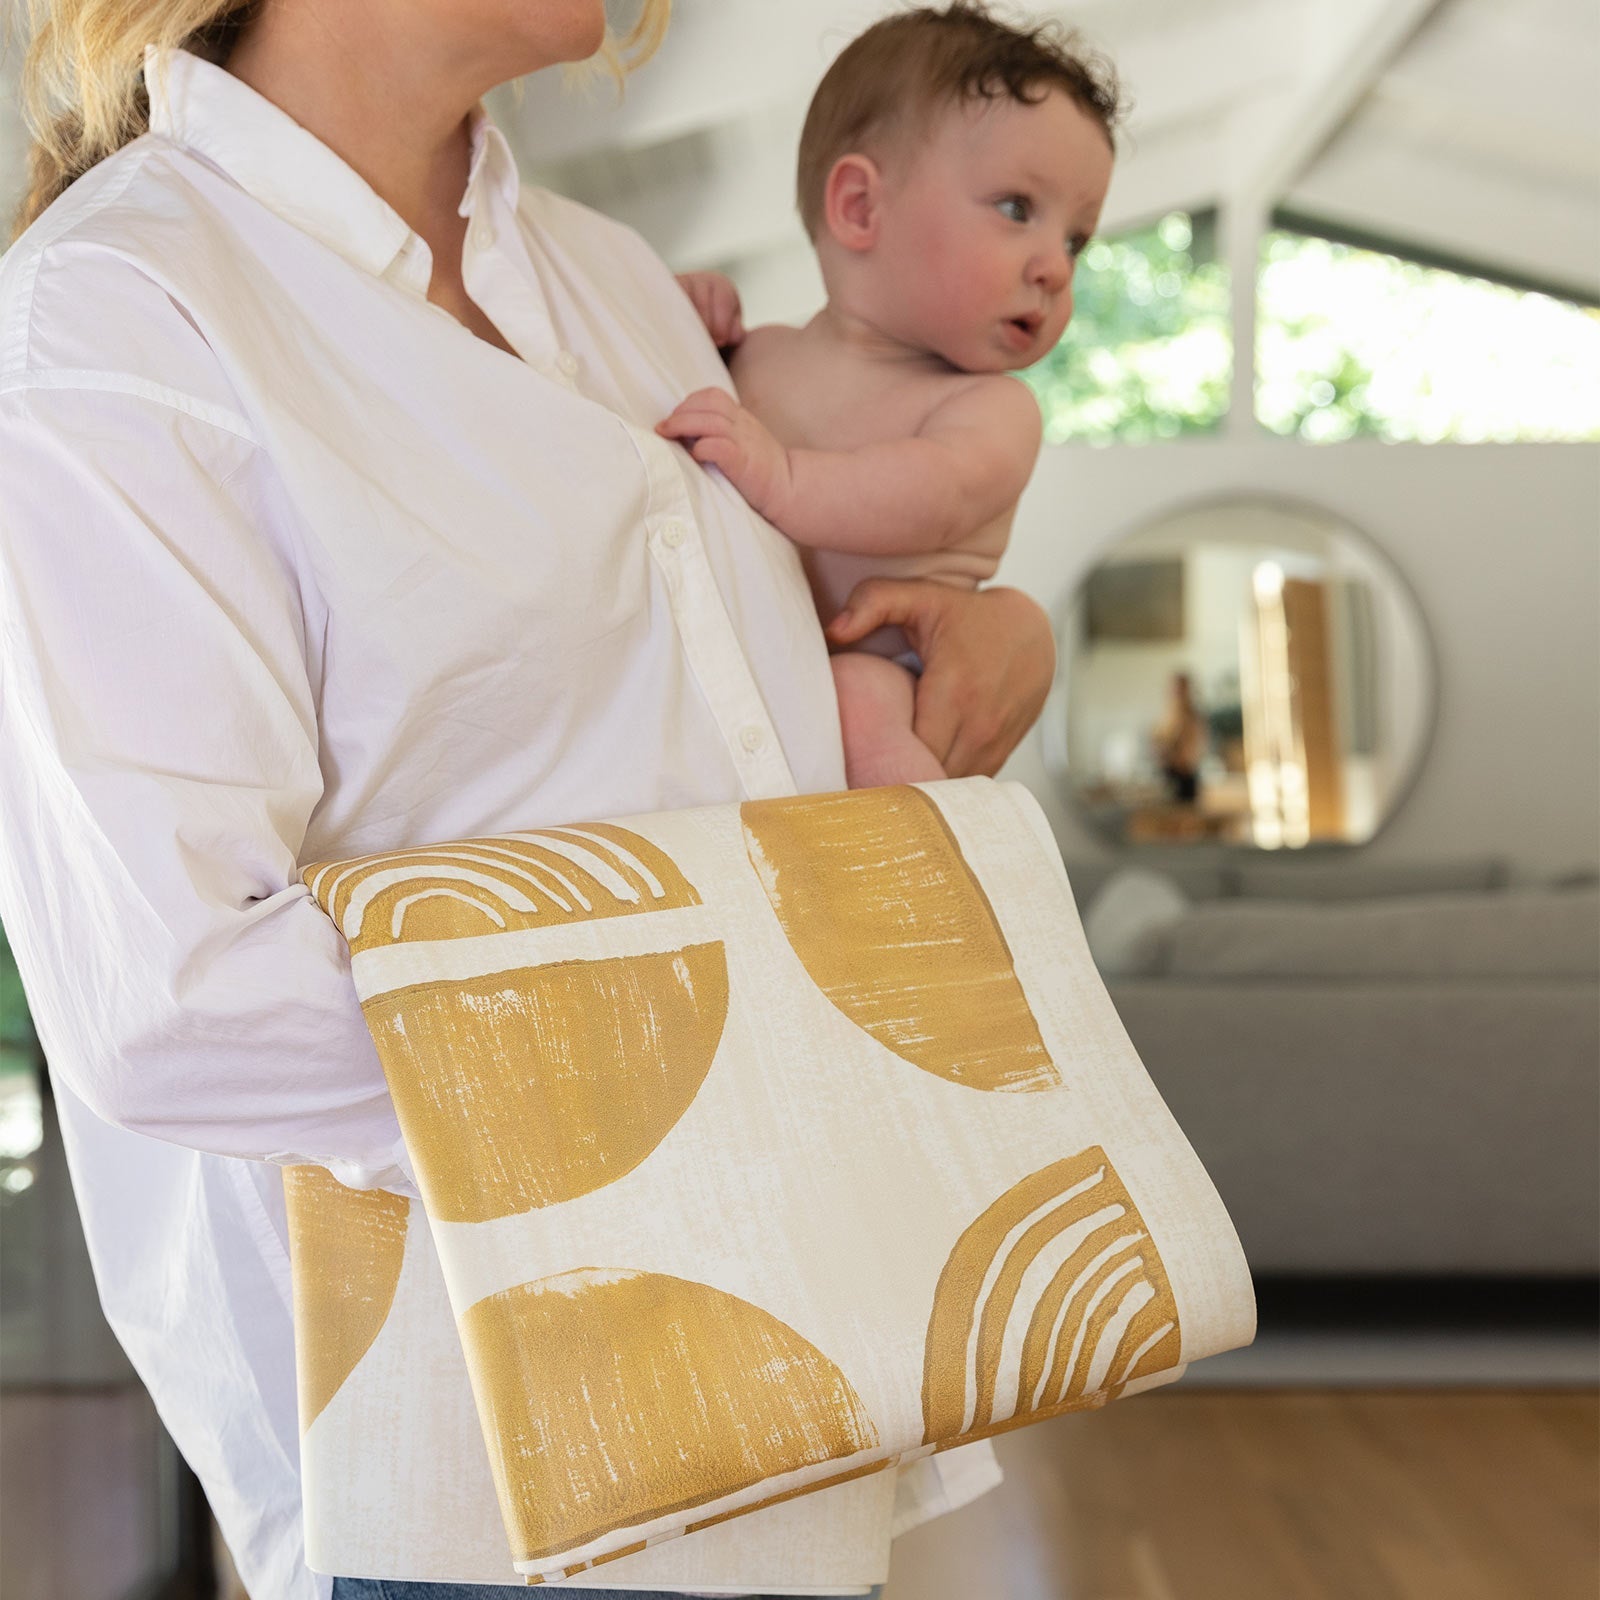 Ada modern minimalist baby high chair mat in Sunflower, mustard yellow and off white folded up being carried with a baby by Mom.